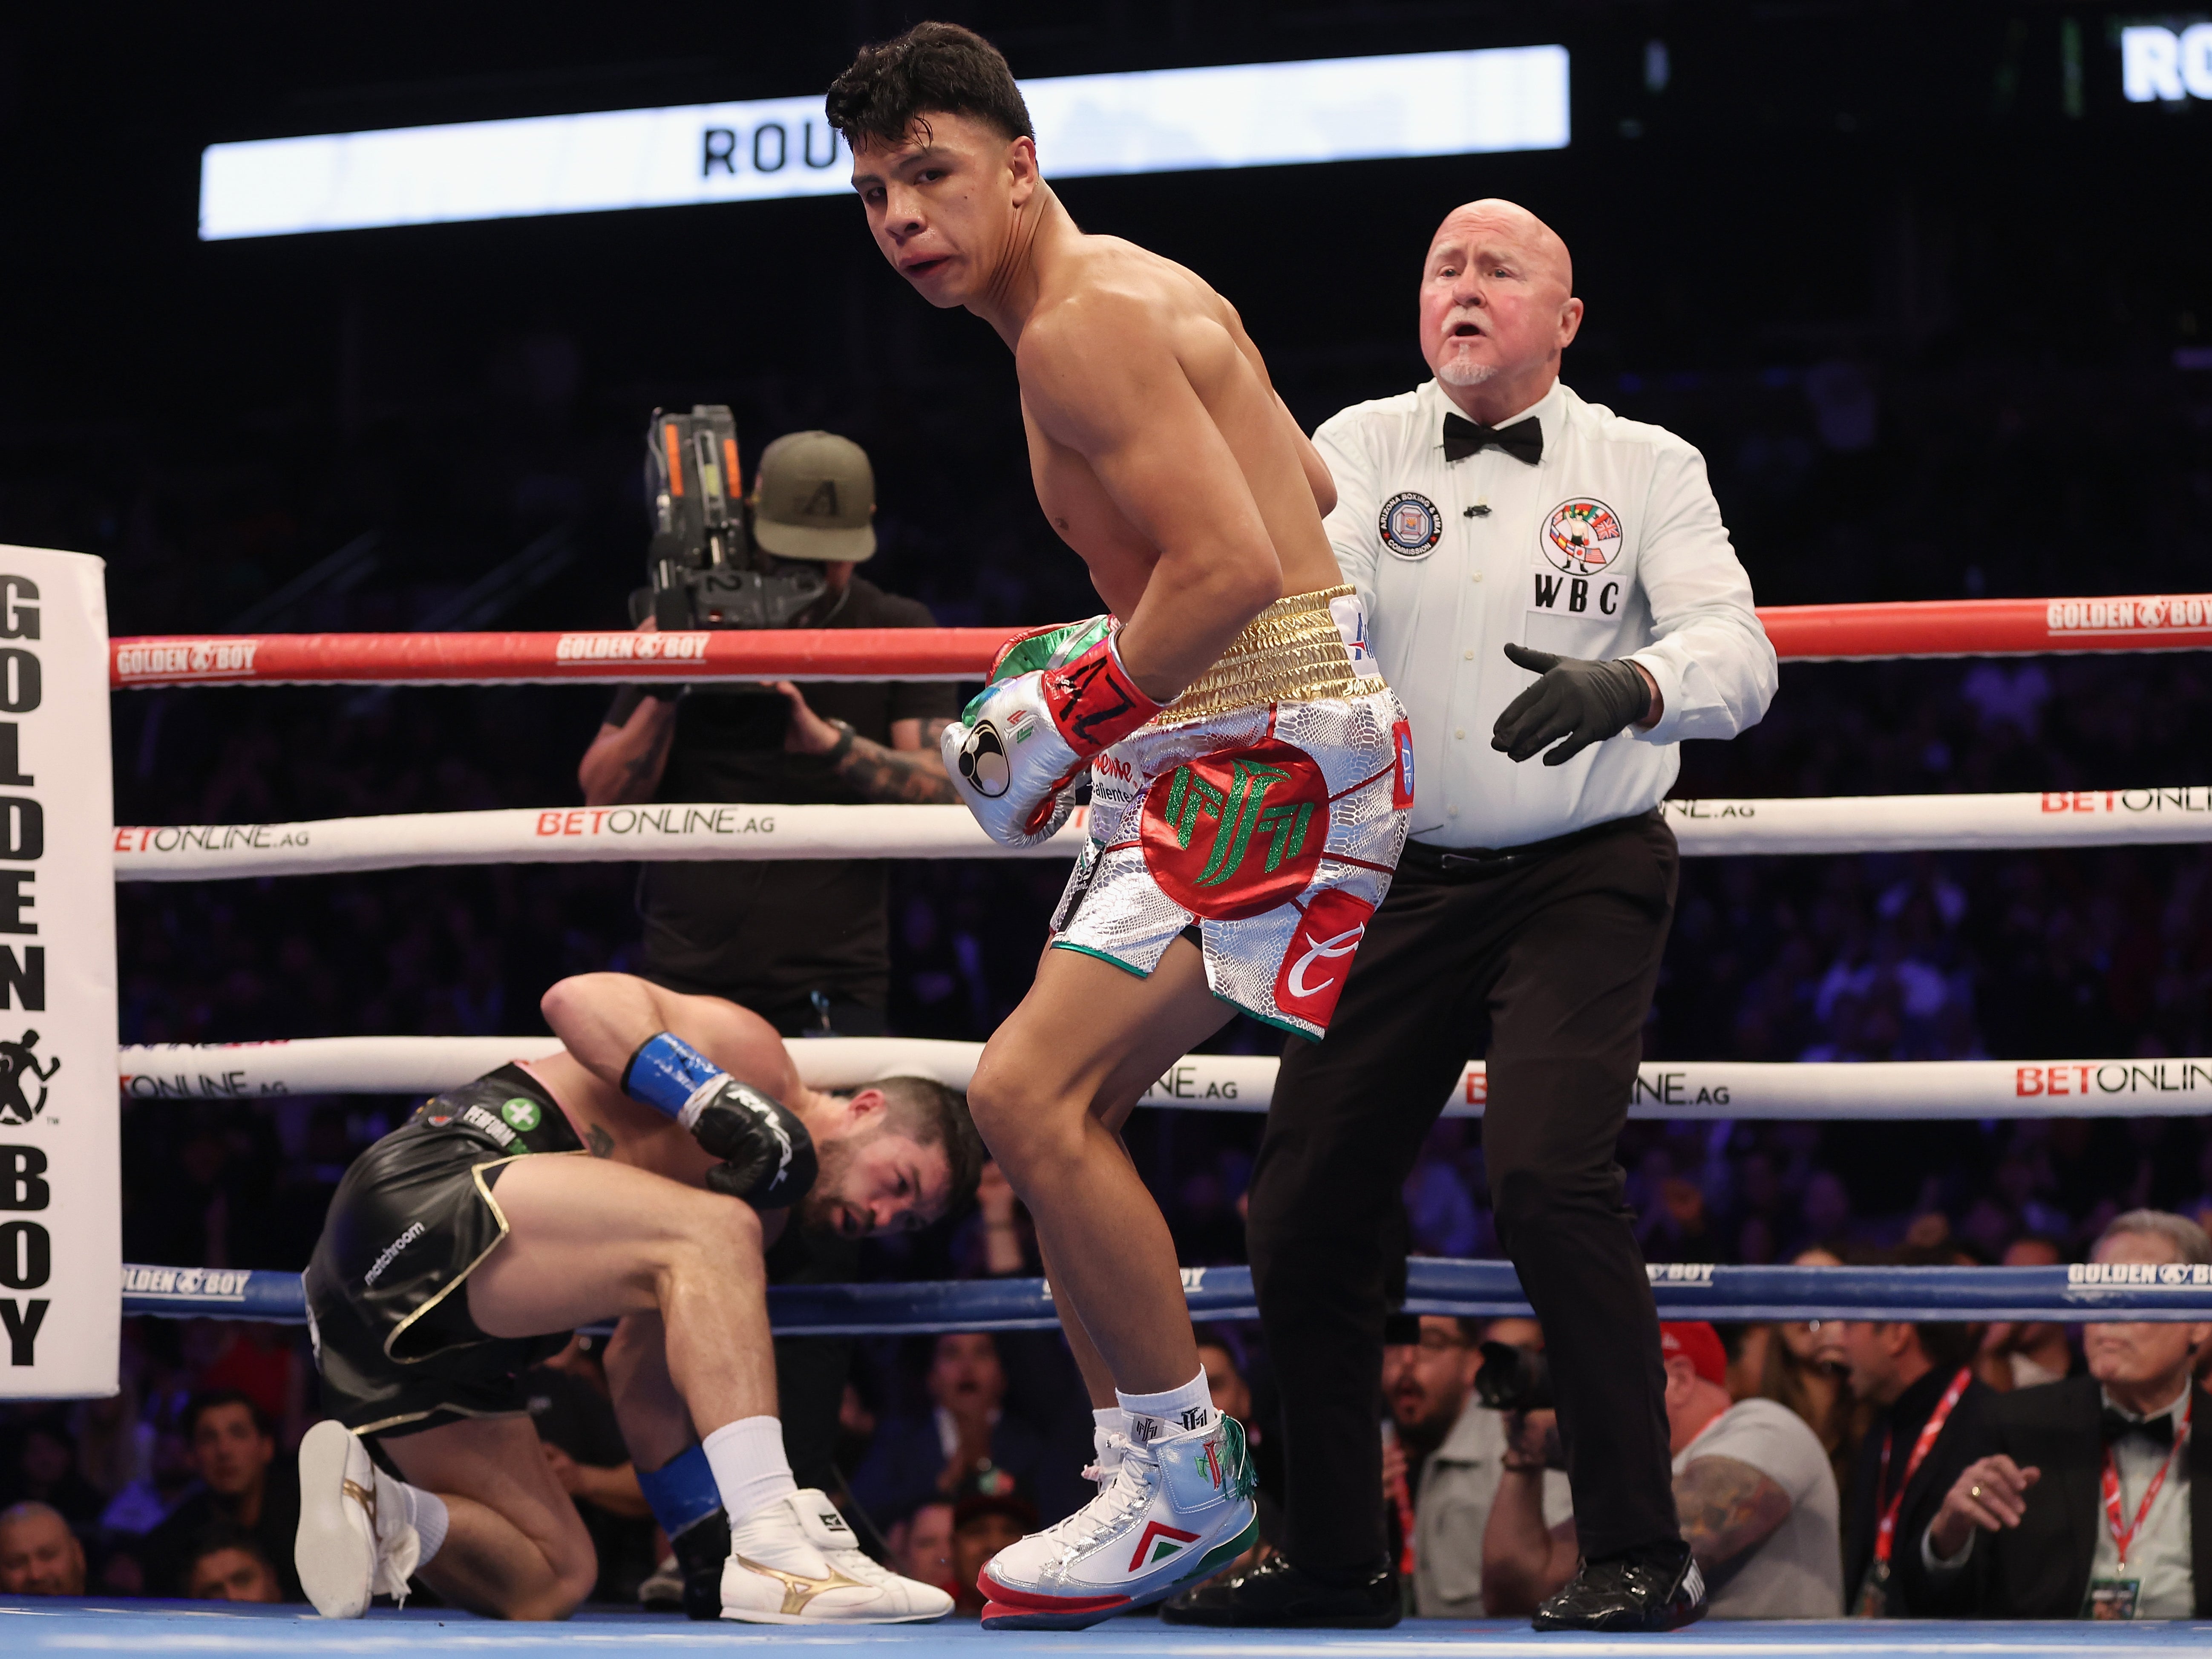 Munguia remains unbeaten after stopping Londoner John Ryder in their January bout